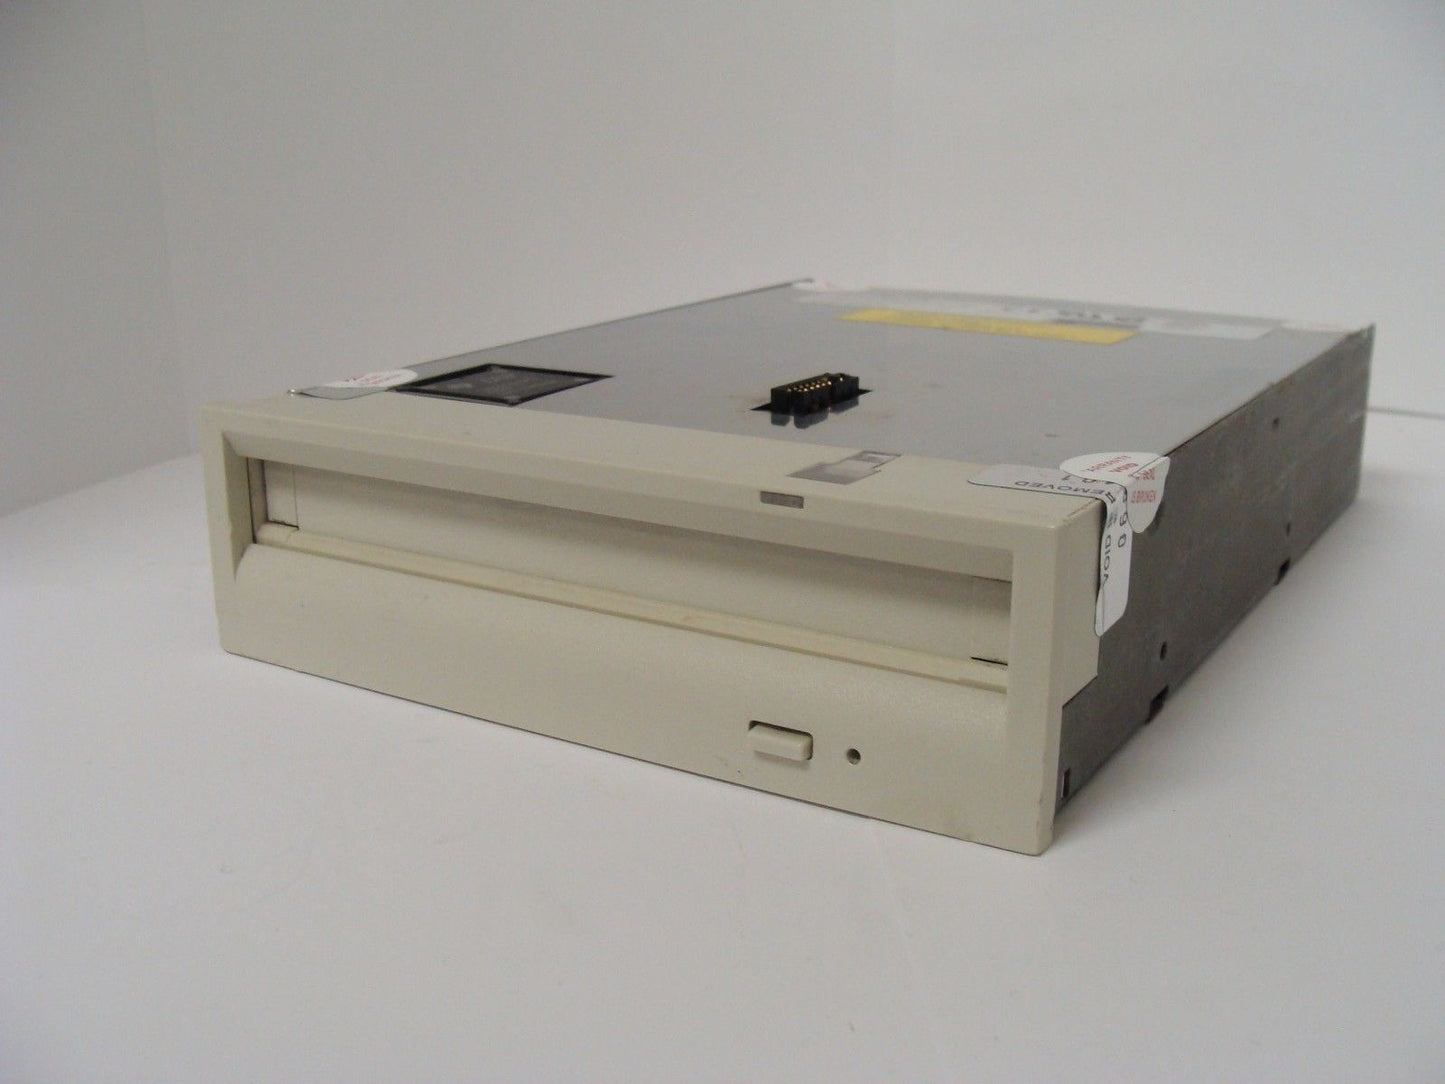 Plasmon DD53 Direct Overwrite Optical Drive SCSI 2.6gb DW260 - Micro Technologies (yourdrives.com)